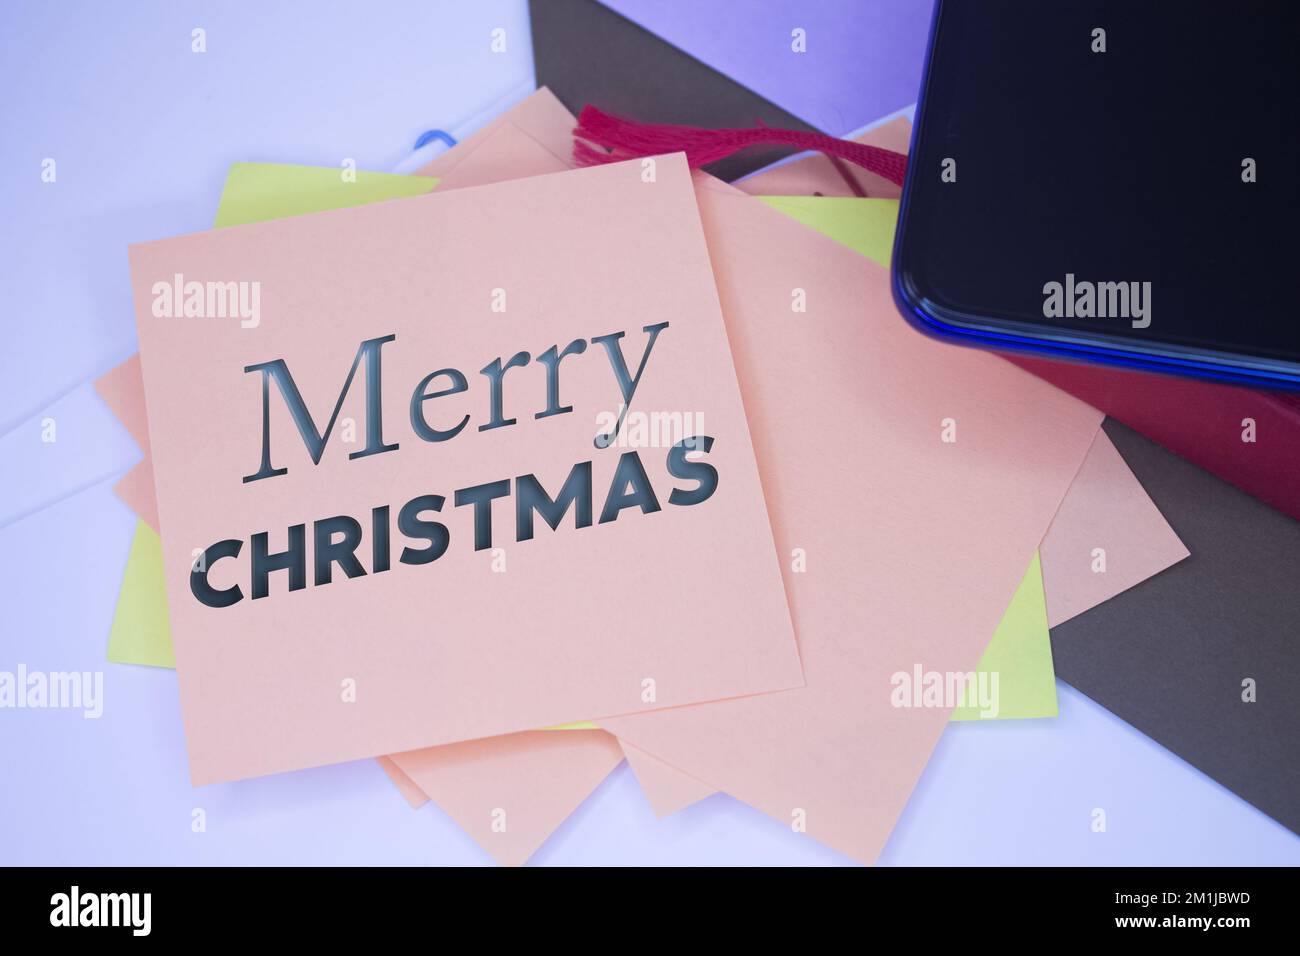 Merry Christmas. Text on adhesive note paper. Event, celebration reminder message. Stock Photo